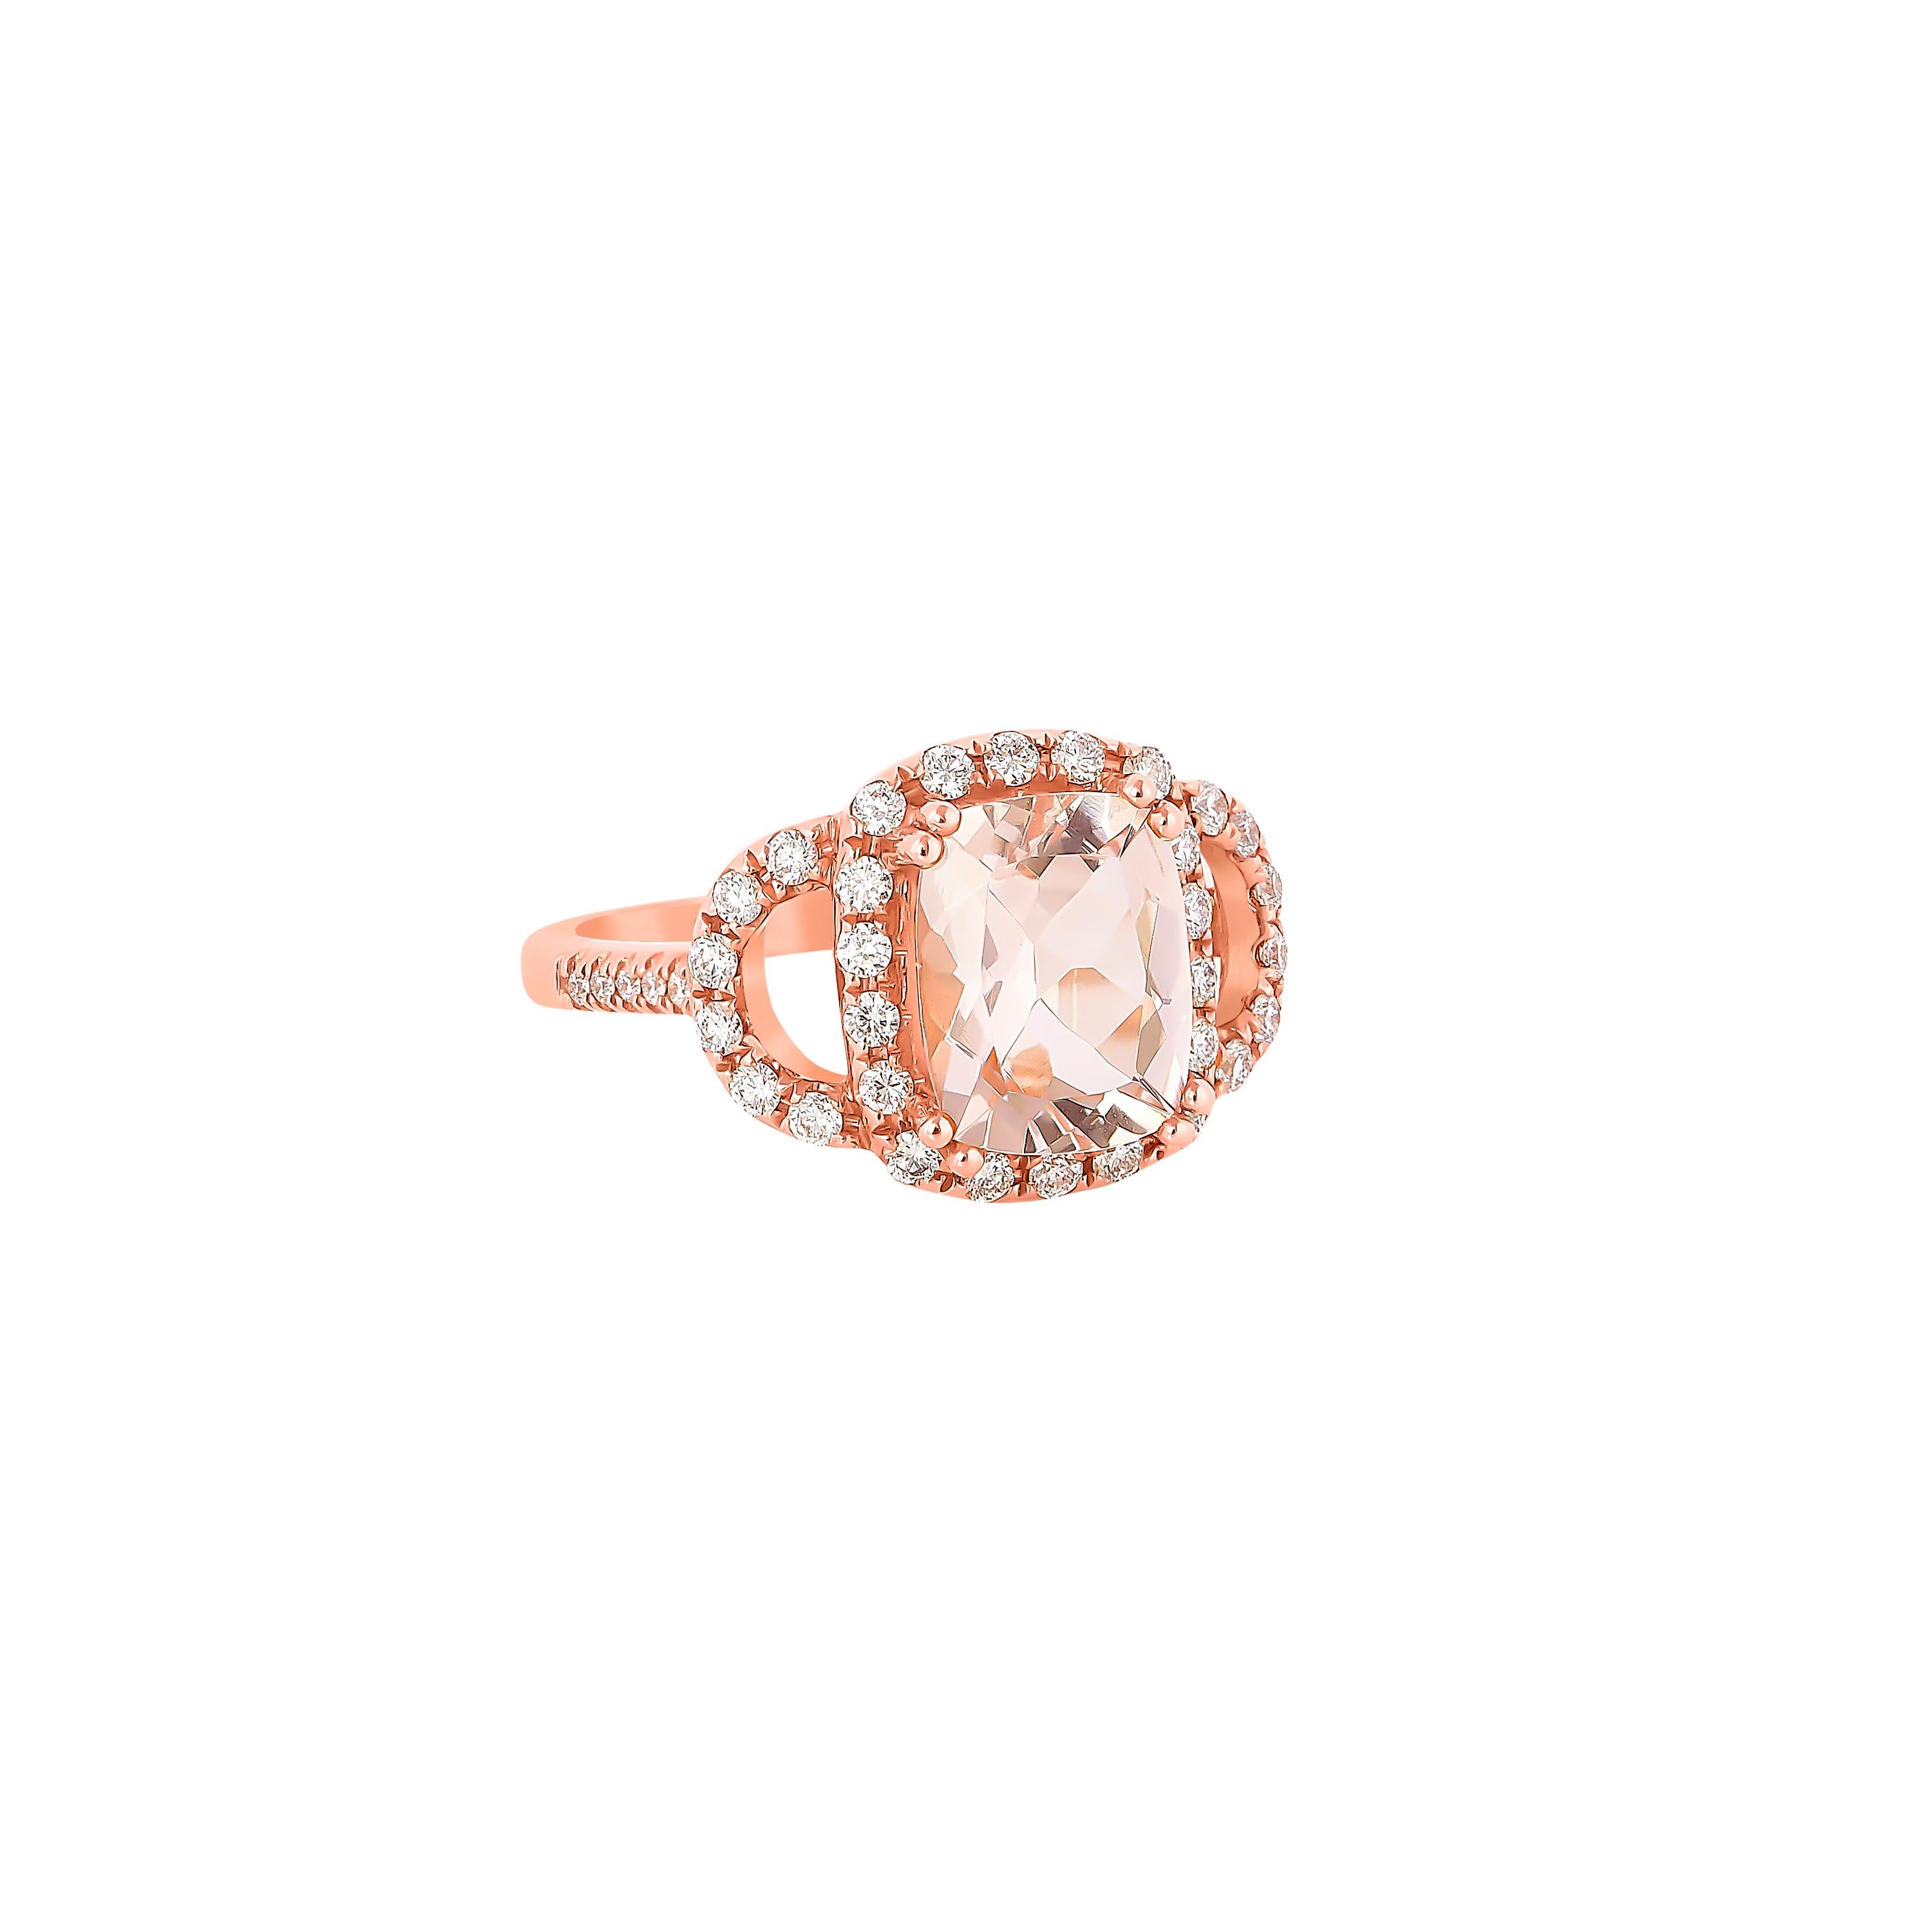 This collection features an array of magnificent morganites! Accented with Diamonds these rings are made in rose gold and present a classic yet elegant look. 

Classic morganite ring in 18K Rose gold with Diamond. 

Morganite: 2.42 carat, 10X8mm